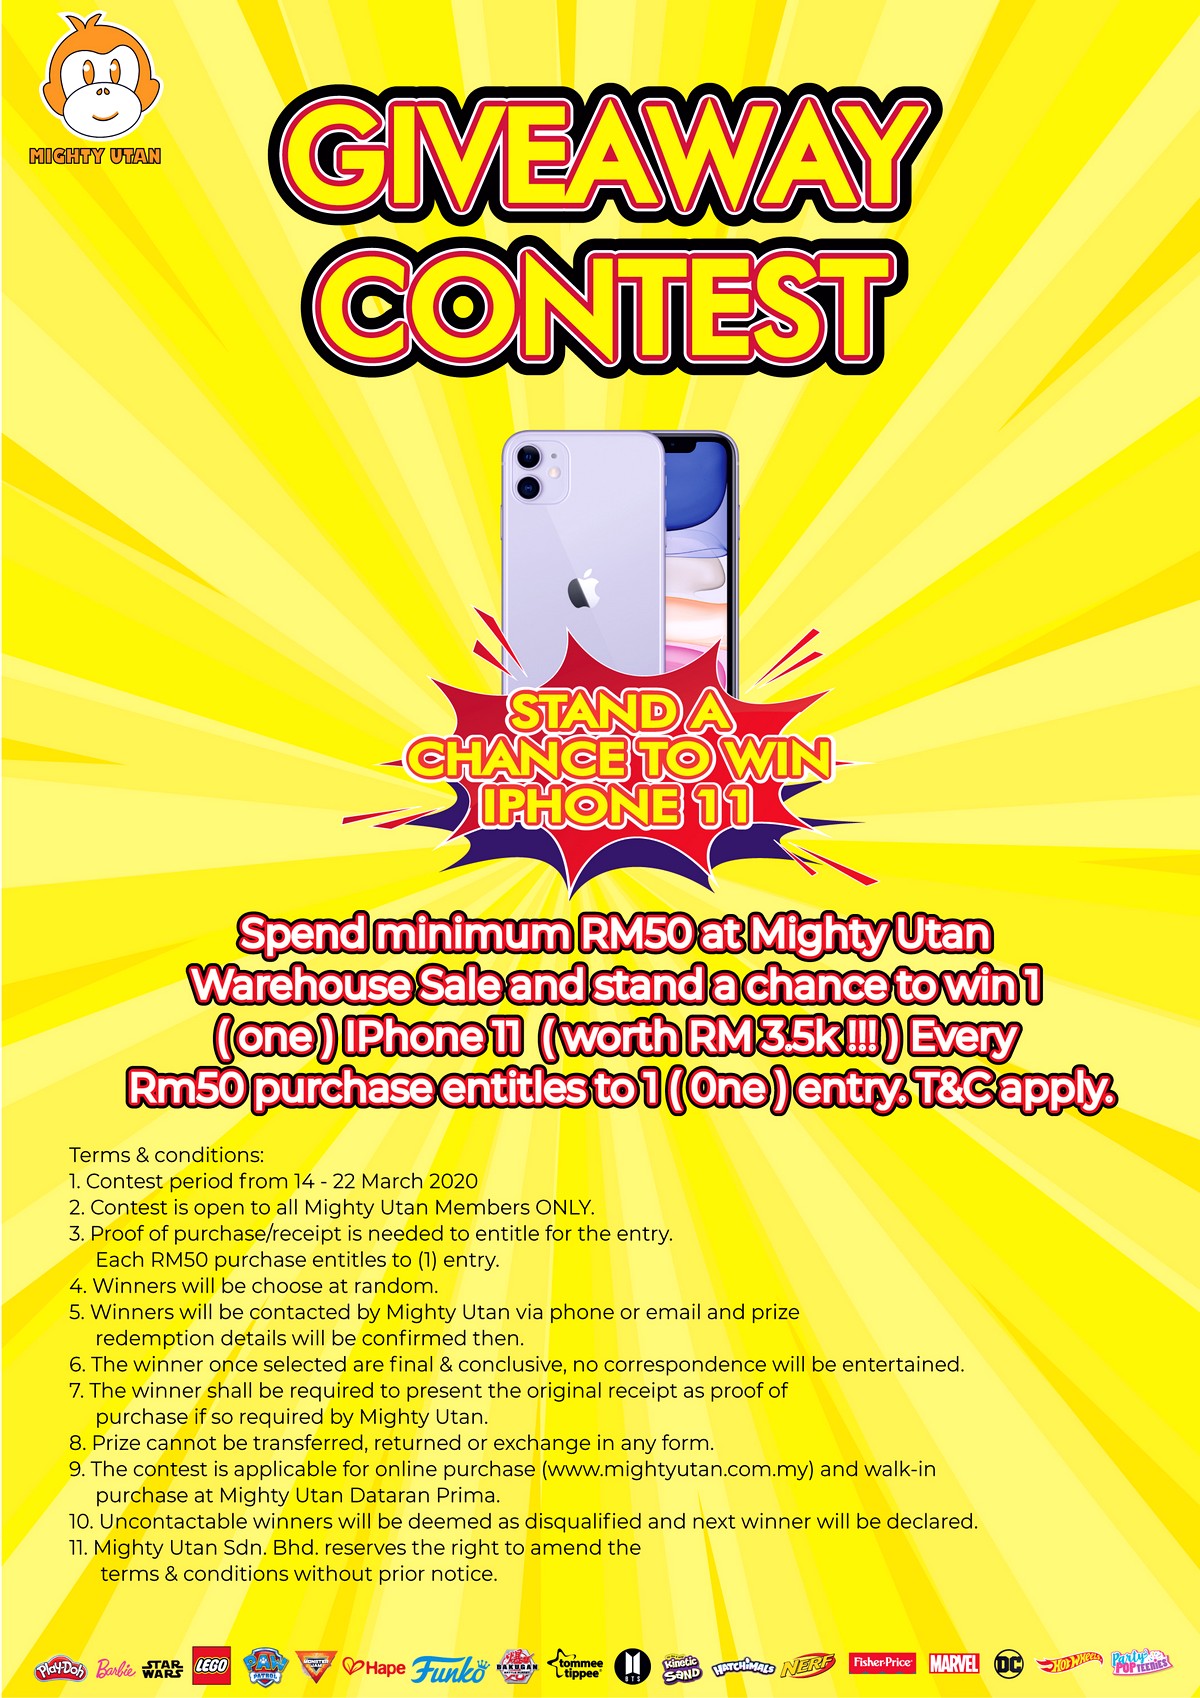 giveaway-contest-2 - Baby & Kids & Toys Education Kuala Lumpur Selangor Toys Warehouse Sale & Clearance in Malaysia 